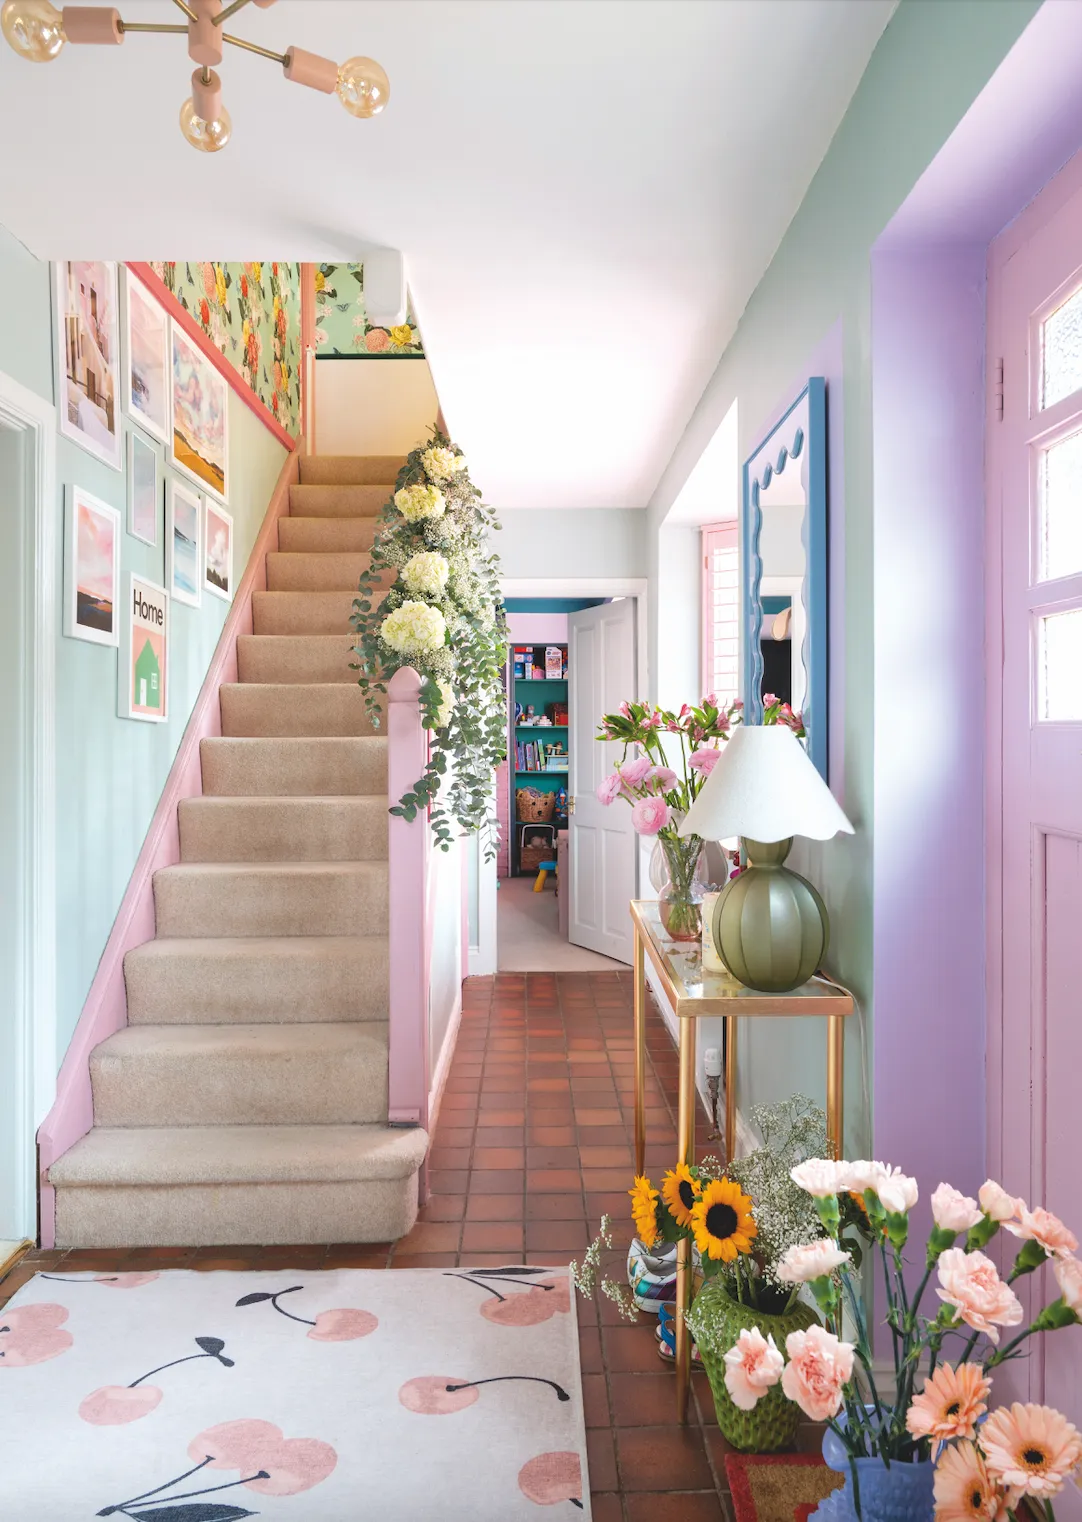 Sophia loves to fill her home with fresh flowers and has even decorated the bannister with a display of pretty blooms